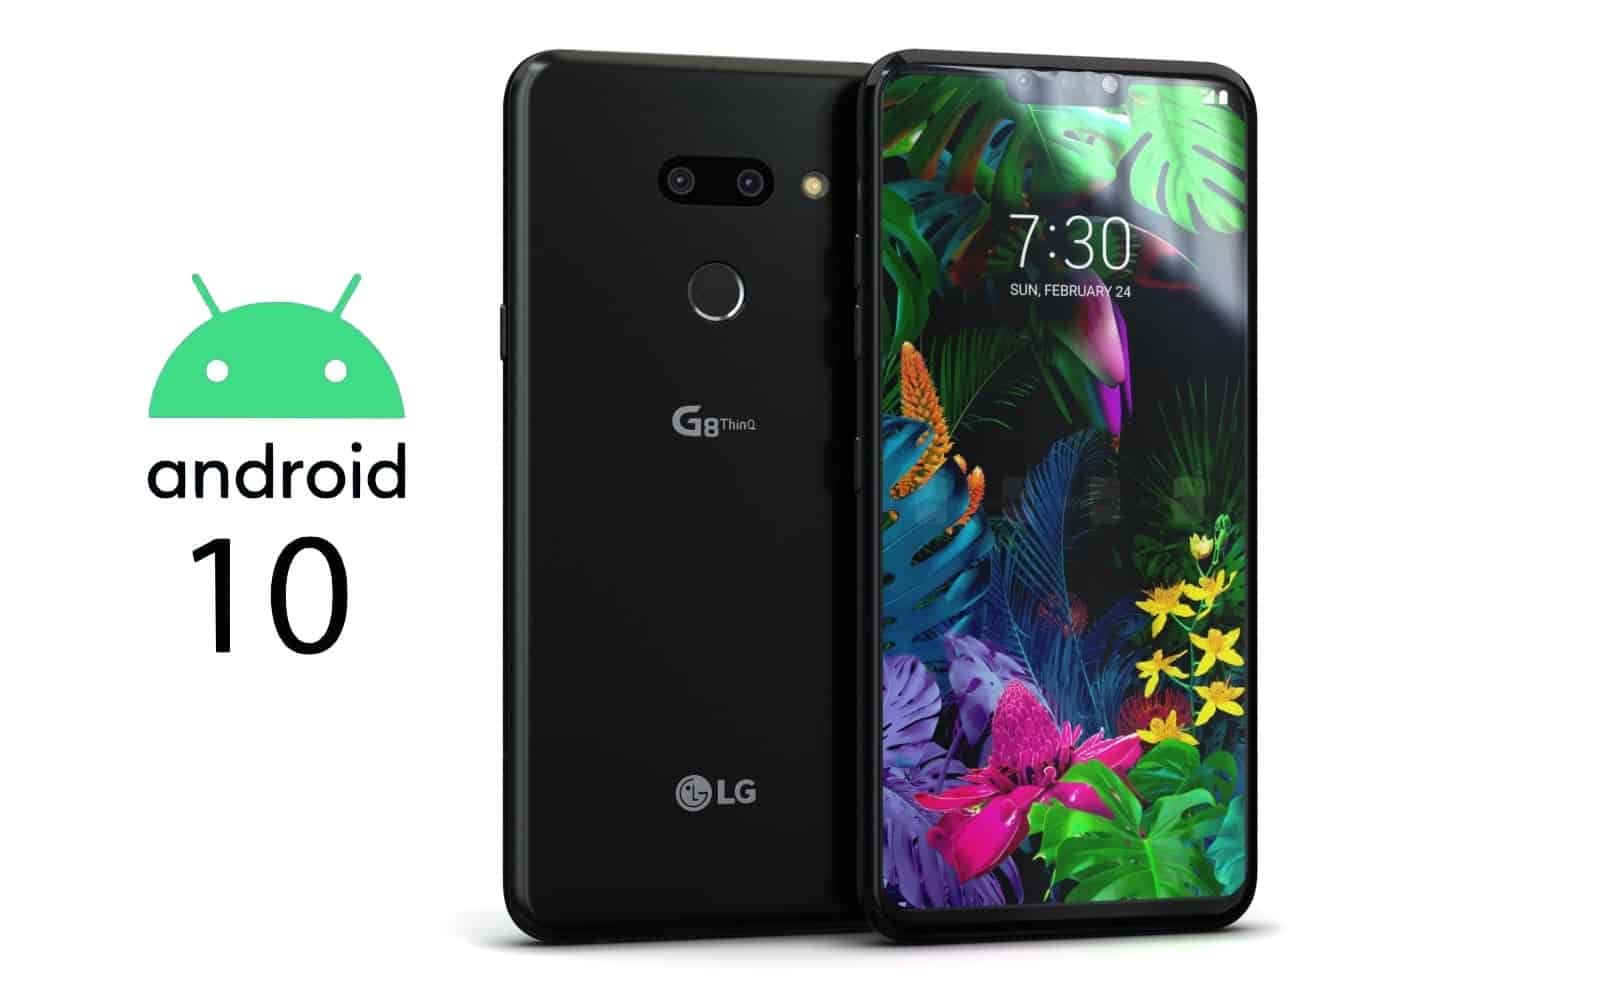 LG Android 10